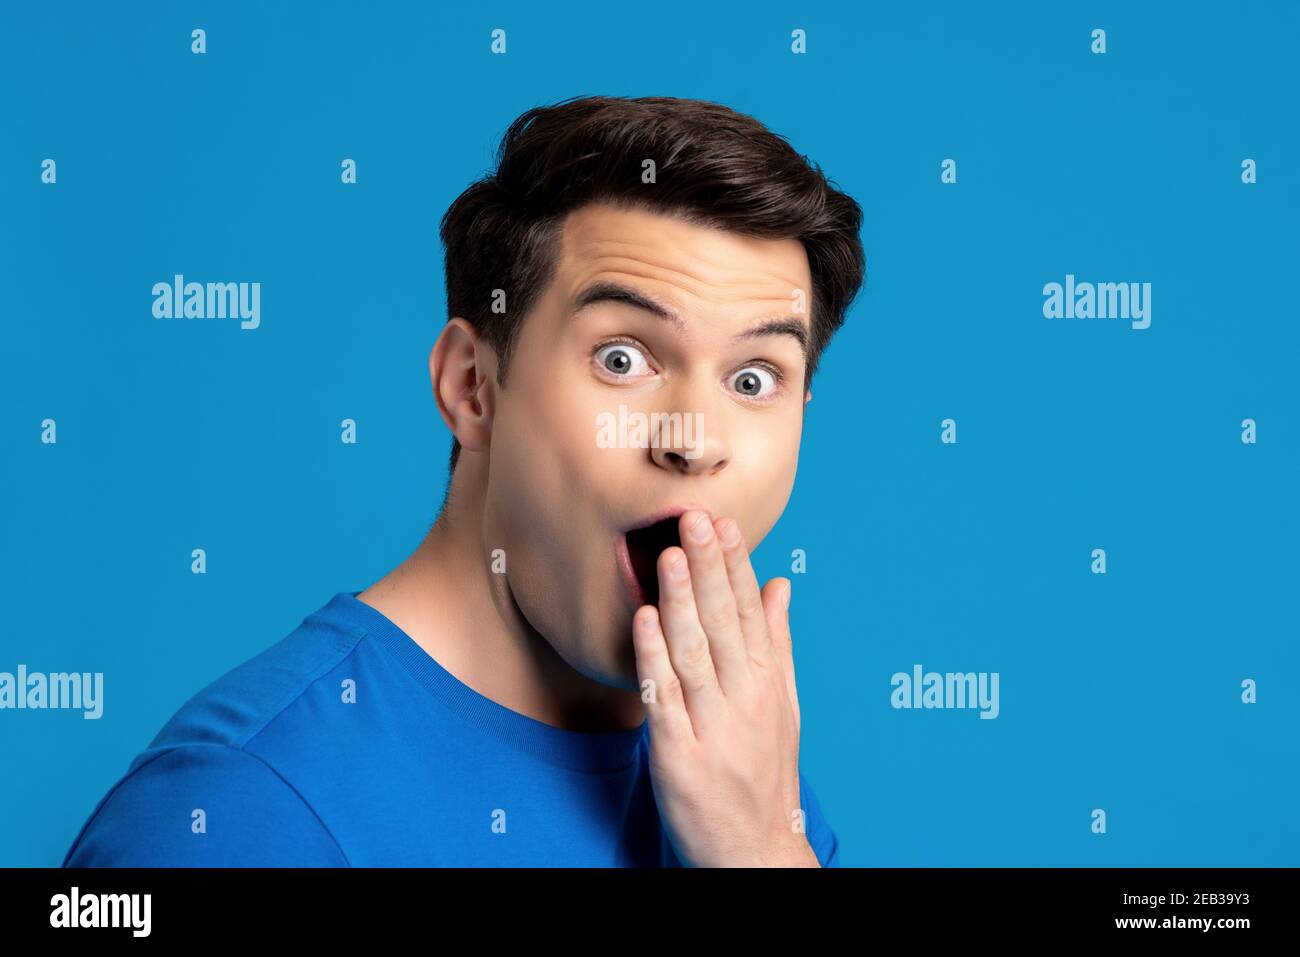 Portrait of  caucasian male model in astonished gesture with hand covering mouth in blue isolated studio background, selective focused Stock Photo